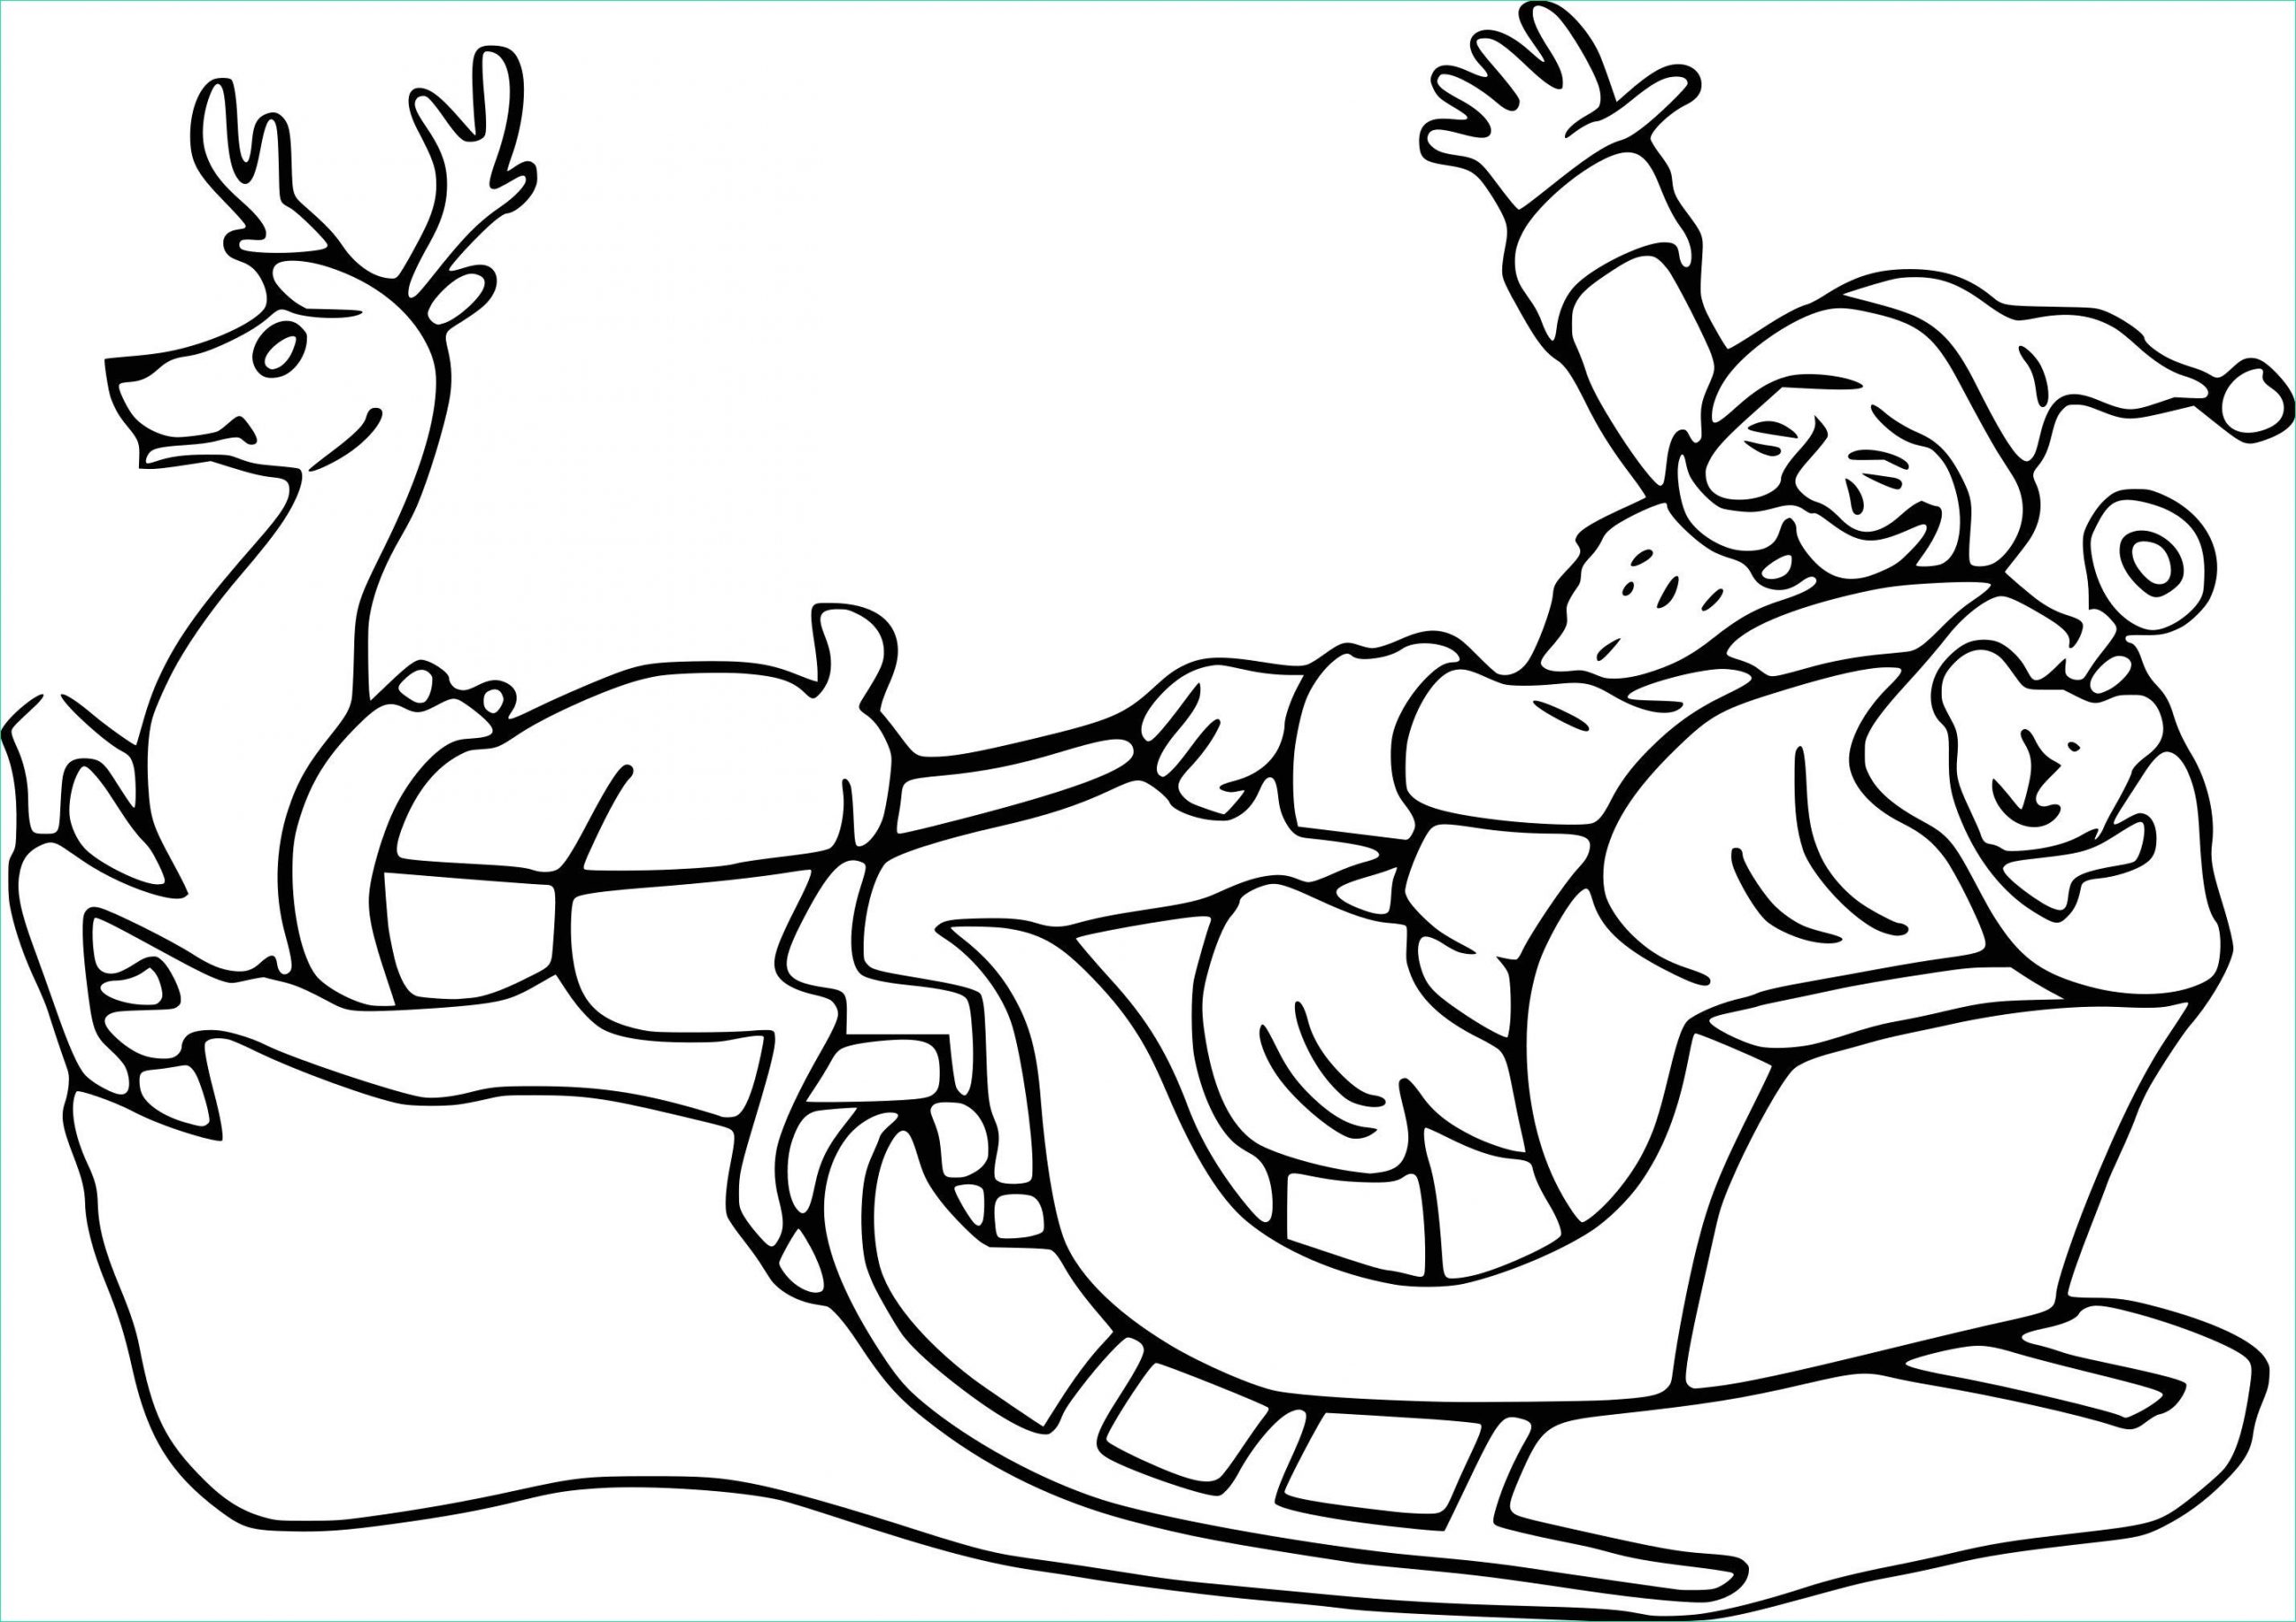 Coloriage Traineau Pere Noel Luxe Photos Dessin Traineau Pere Noel Dessin